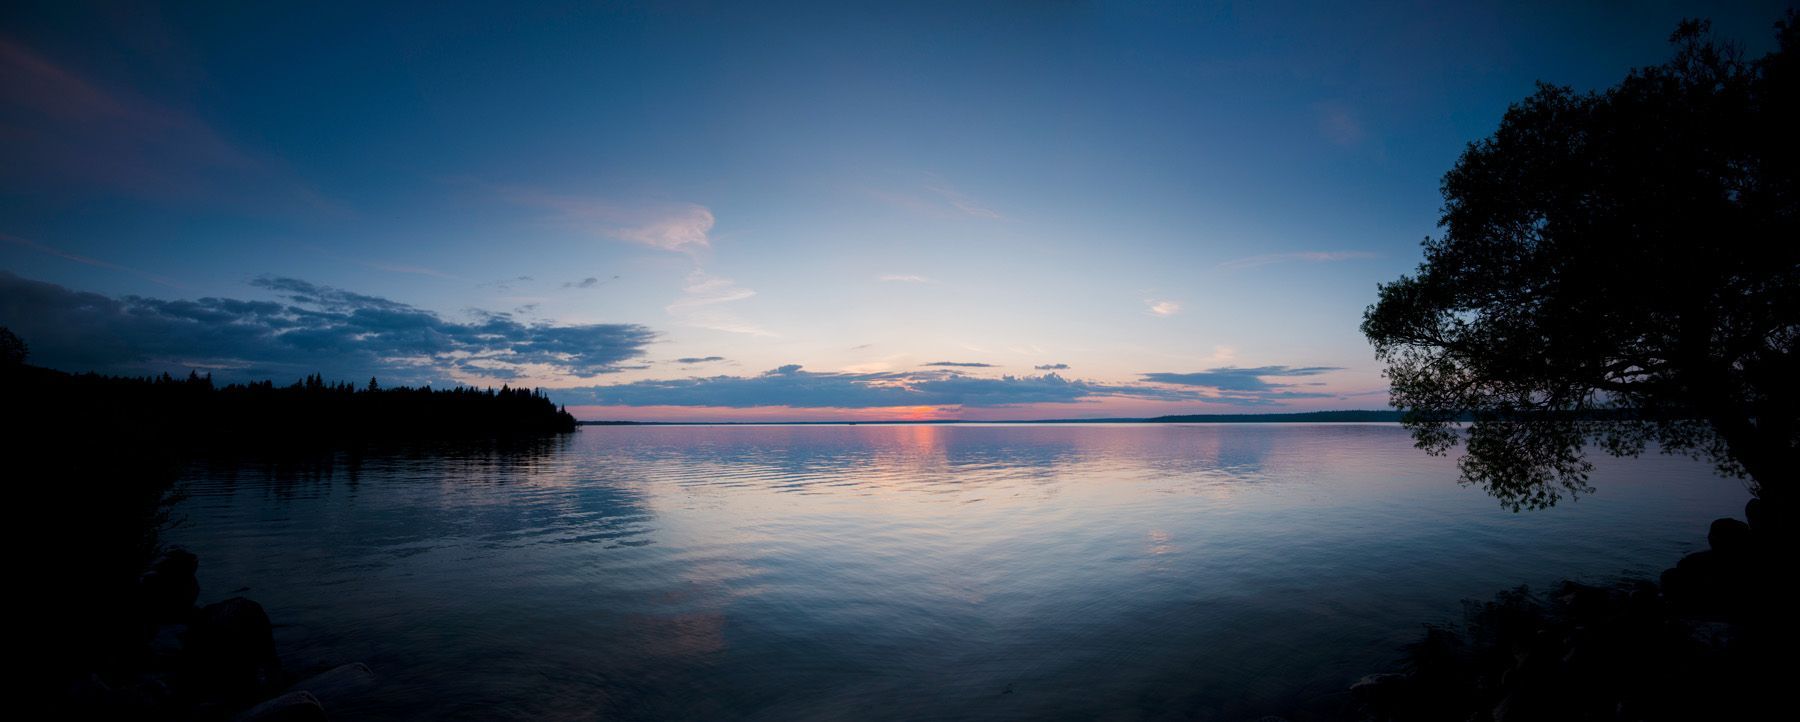 Blue hour approaching at Clear Lake in Wasagaming, Manitoba, Canada.